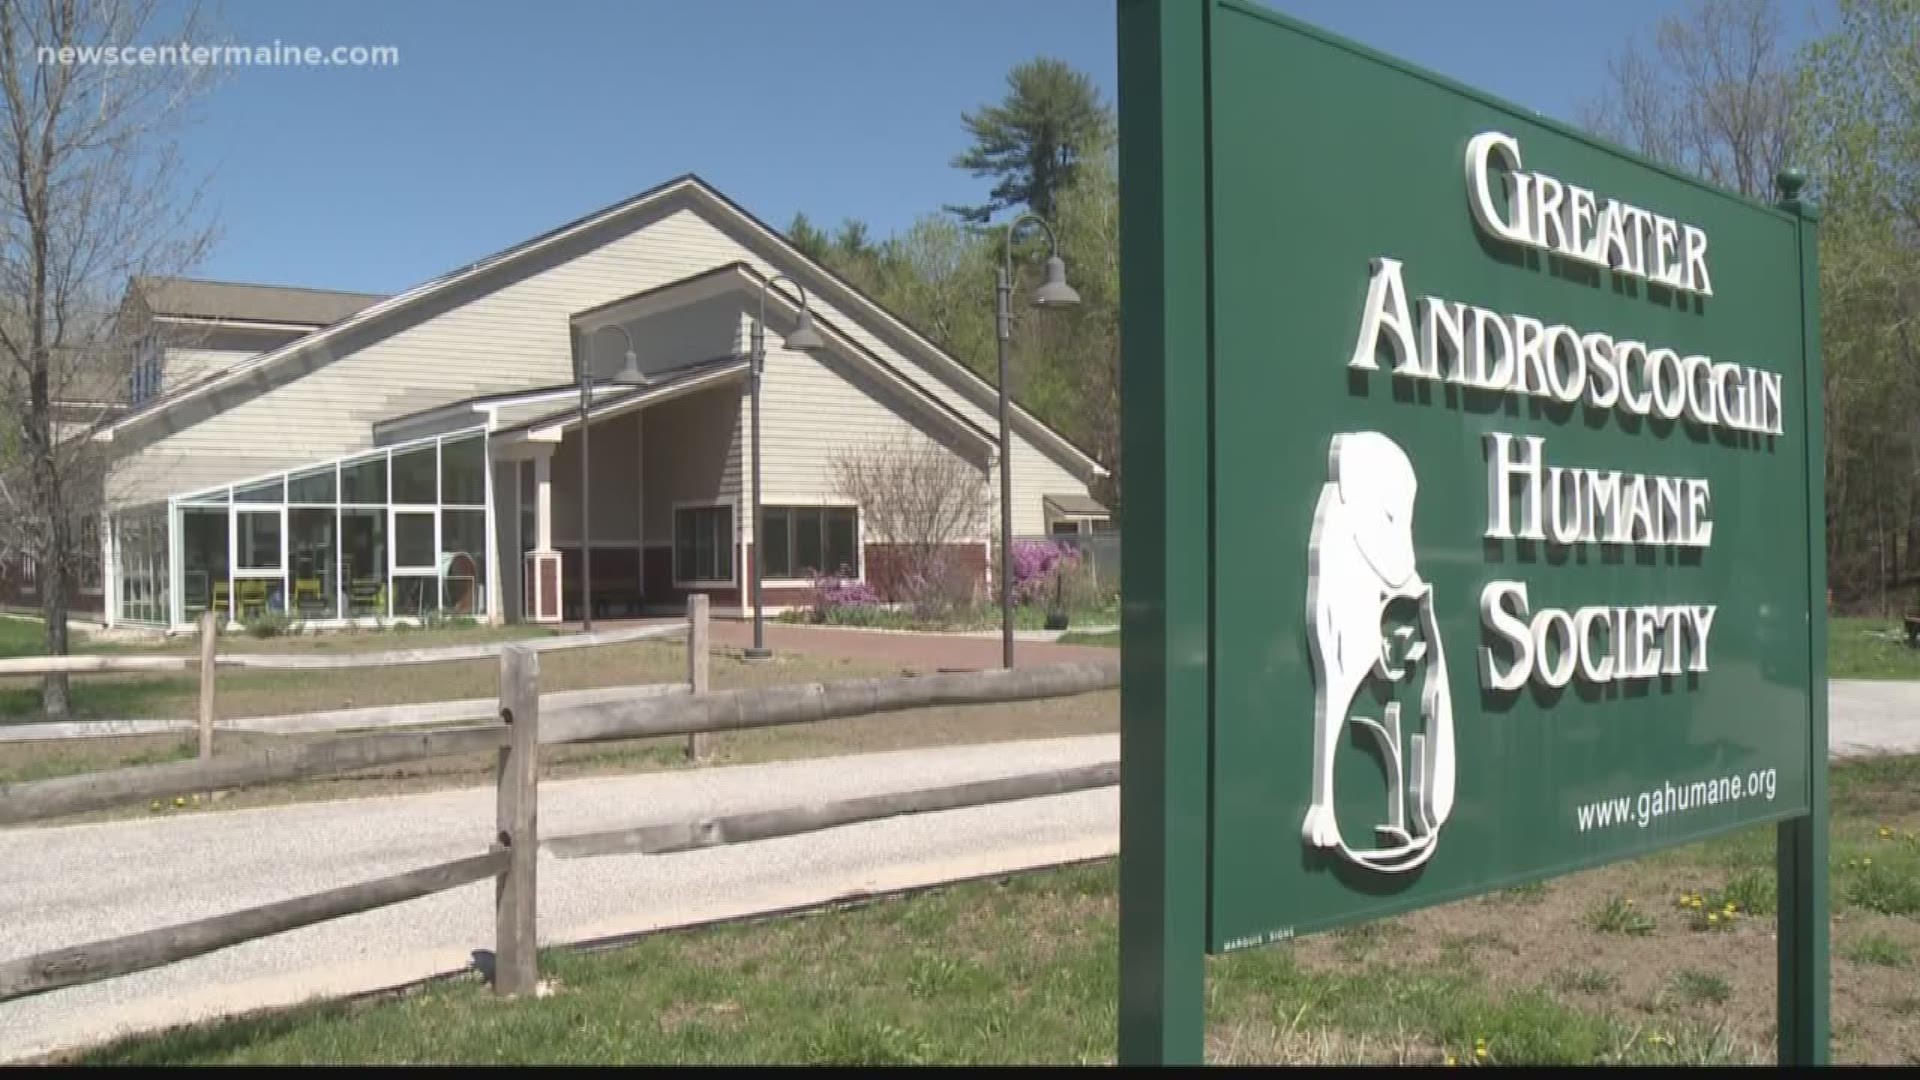 Ex-Employee says shelter is "quick to euthanize"